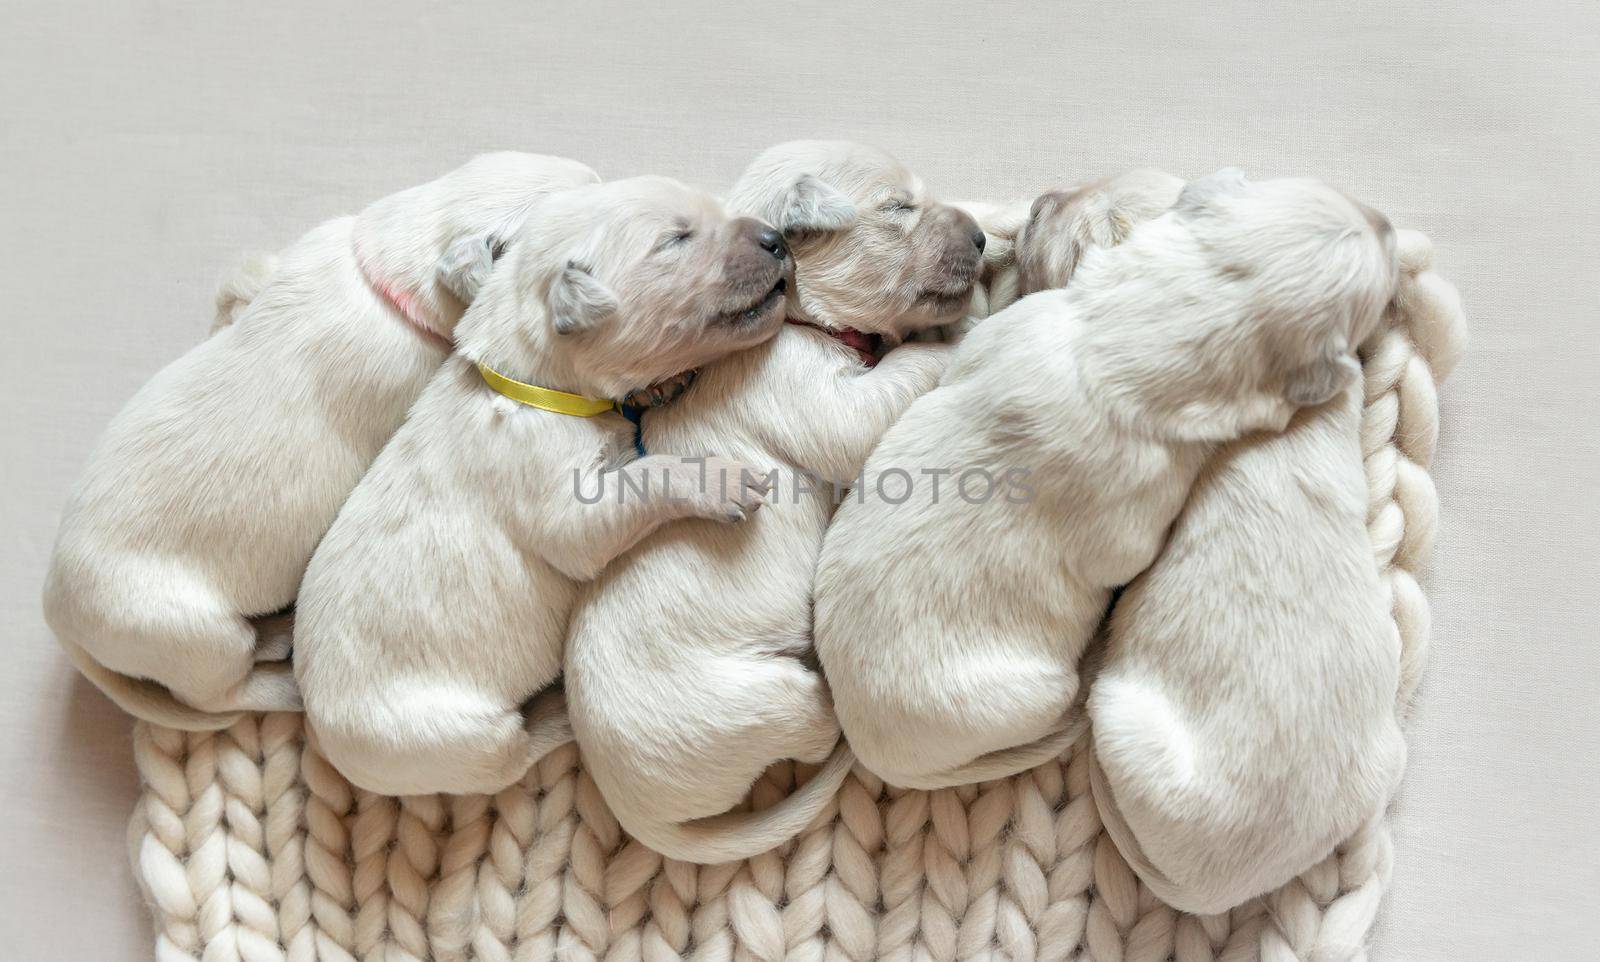 Five cute newborn golden retriever puppies sleeping on the wooden place with woolen blanket on light background